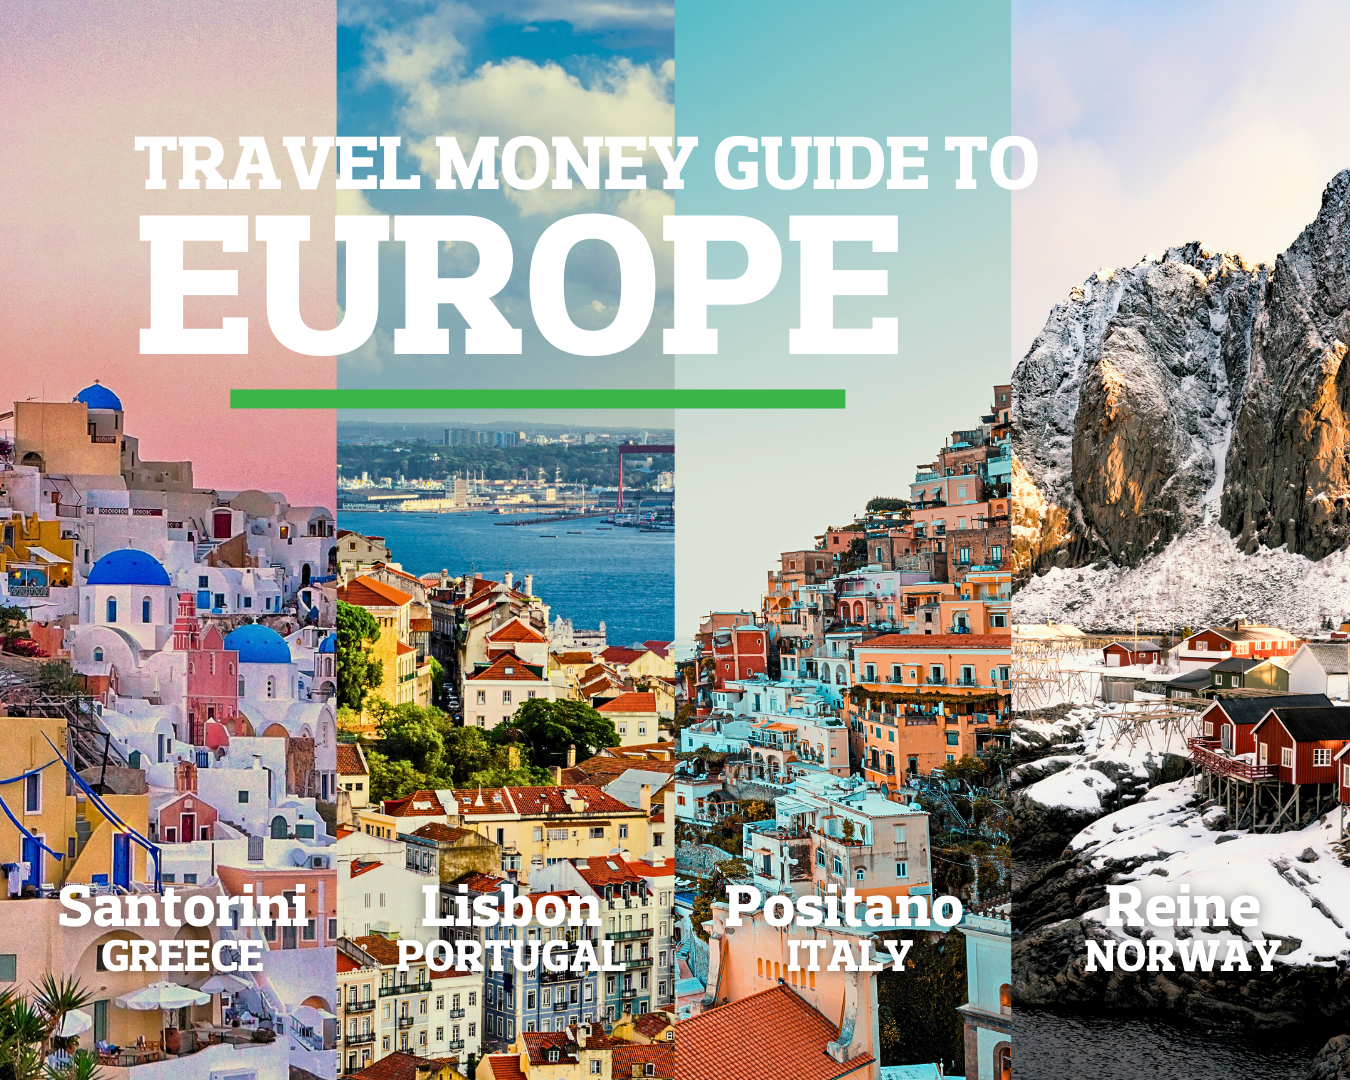 Travel Money For Europe. Image features the Santorini skyline at sunset, Lisbon's vibrant cityscape, the iconic Positano coastline, and dramatic scenery of Norway.